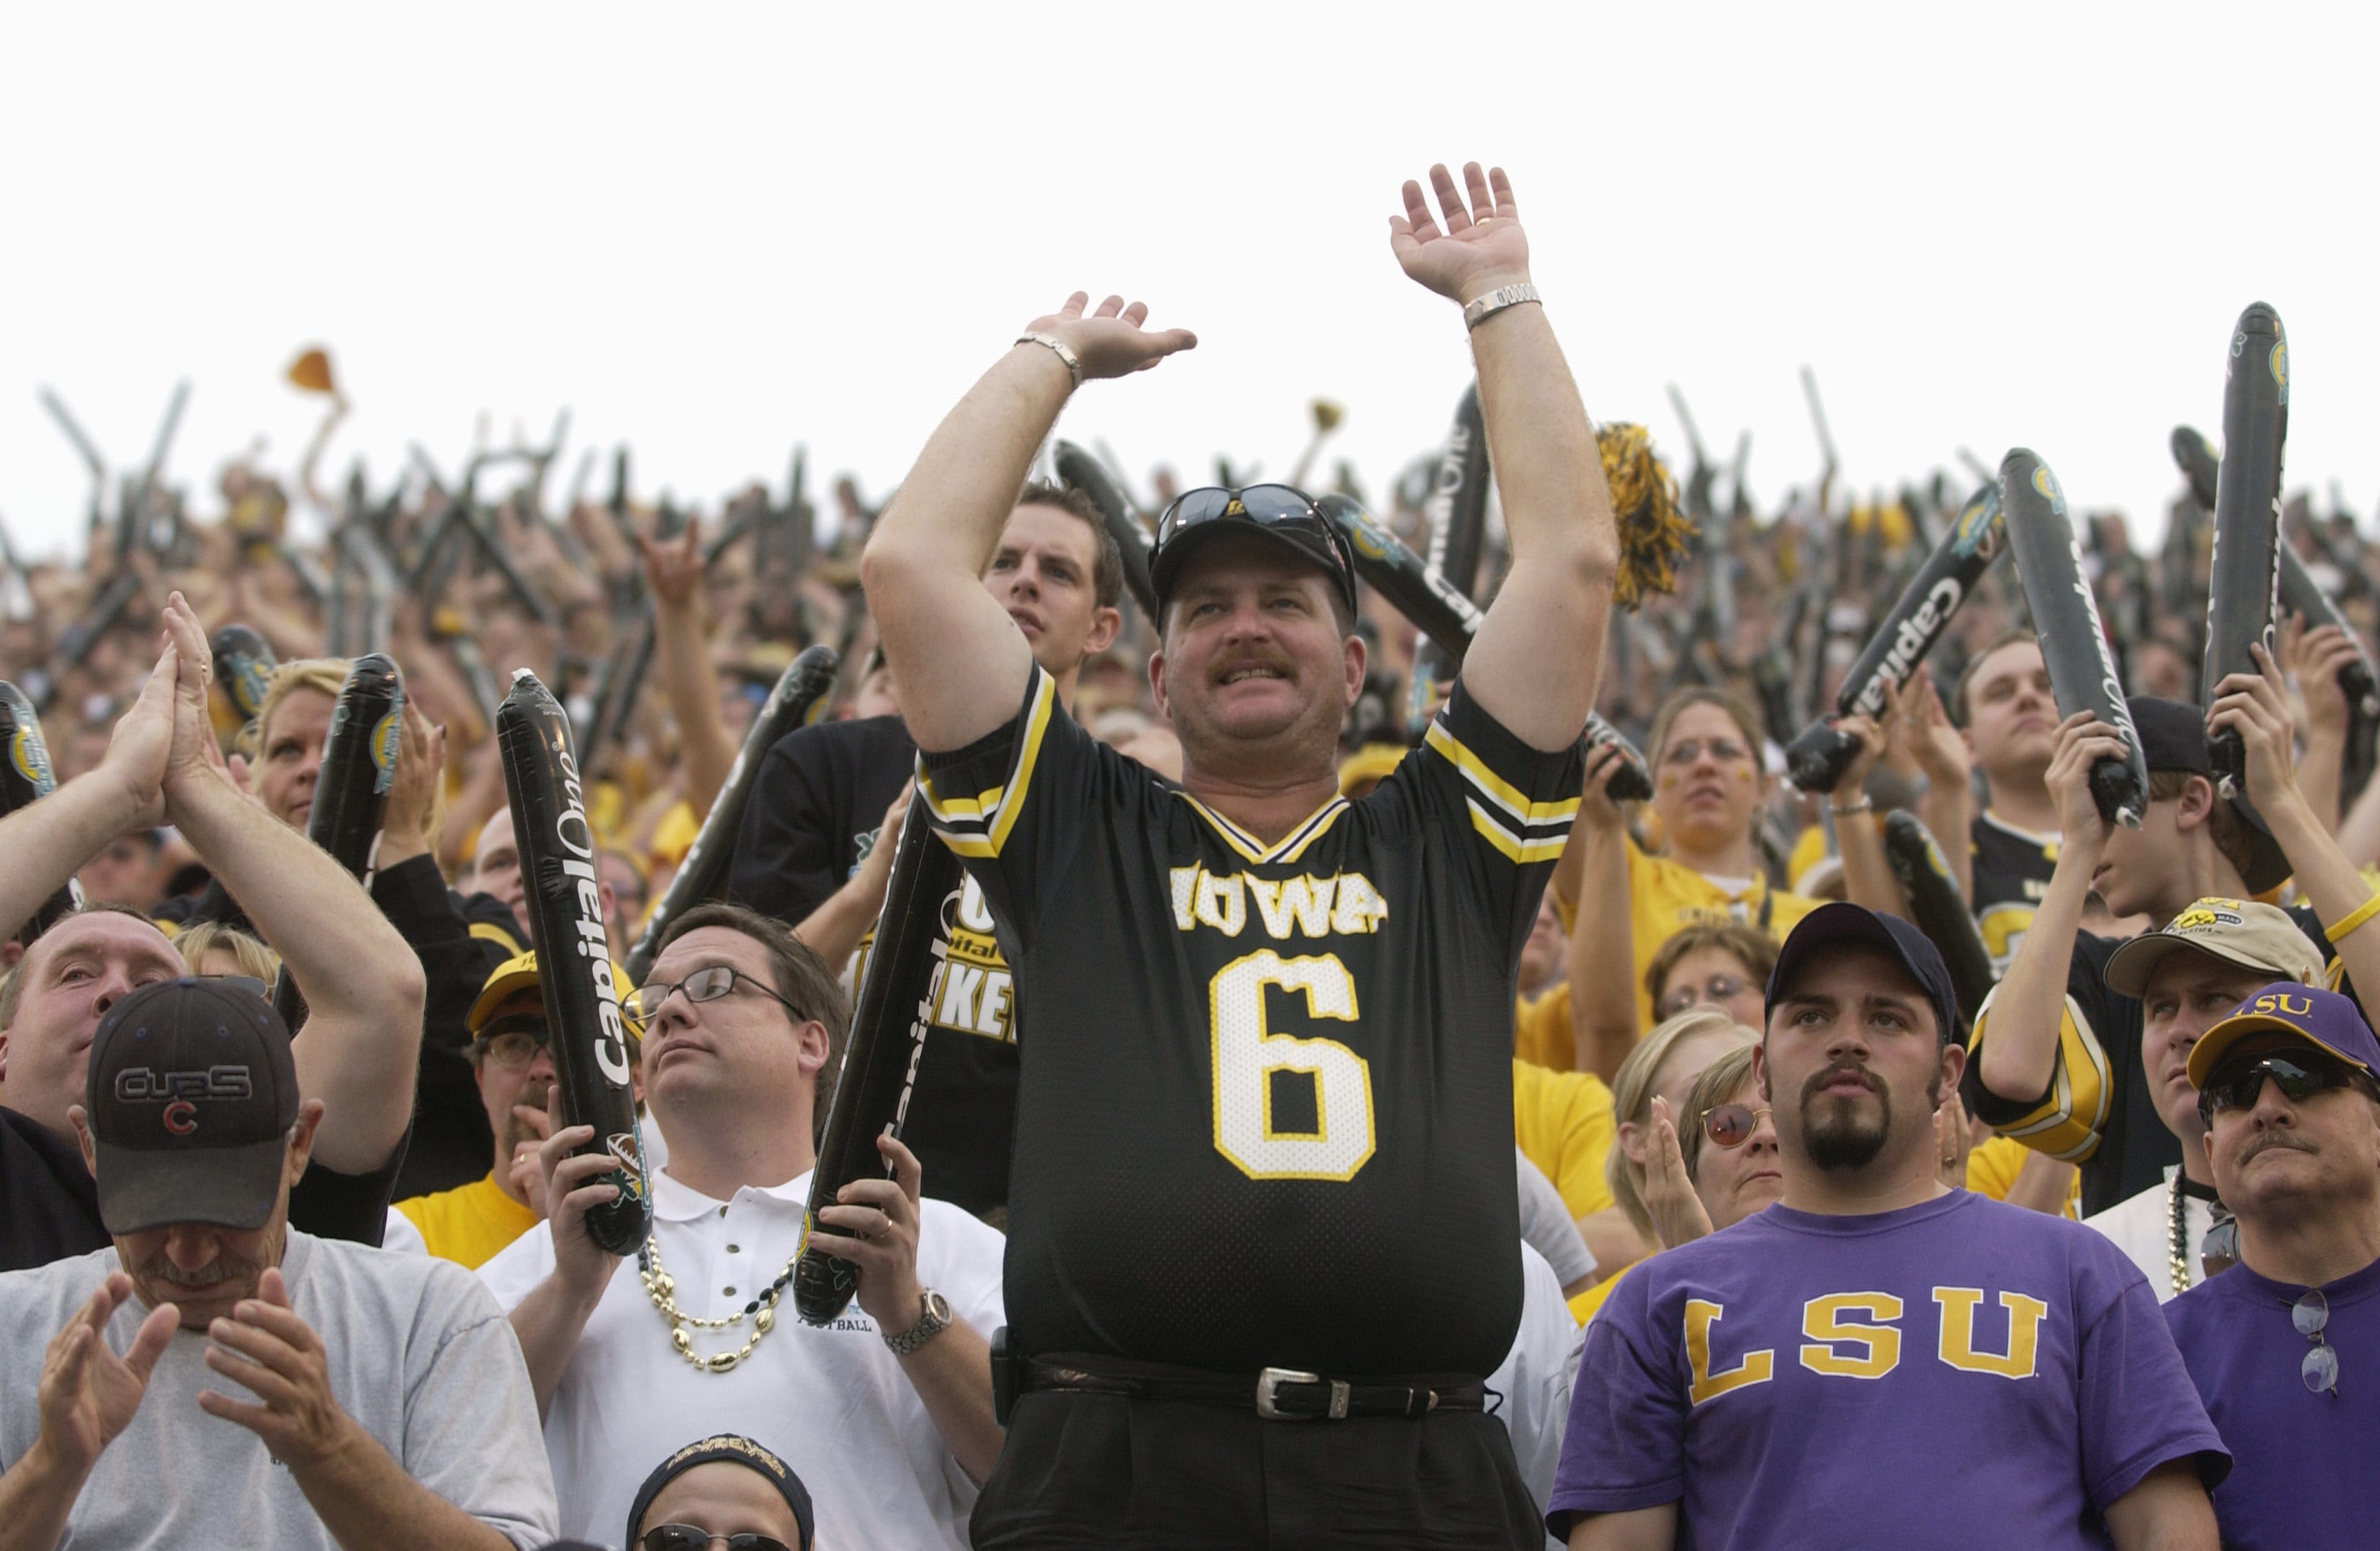 A Iowa Hawkeyes fan watches the action on the field during the Capital One Bowl game against the LSU Tigers at the Florida Citrus Bowl on Saturday, Jan. 1, 2005 in Orlando.